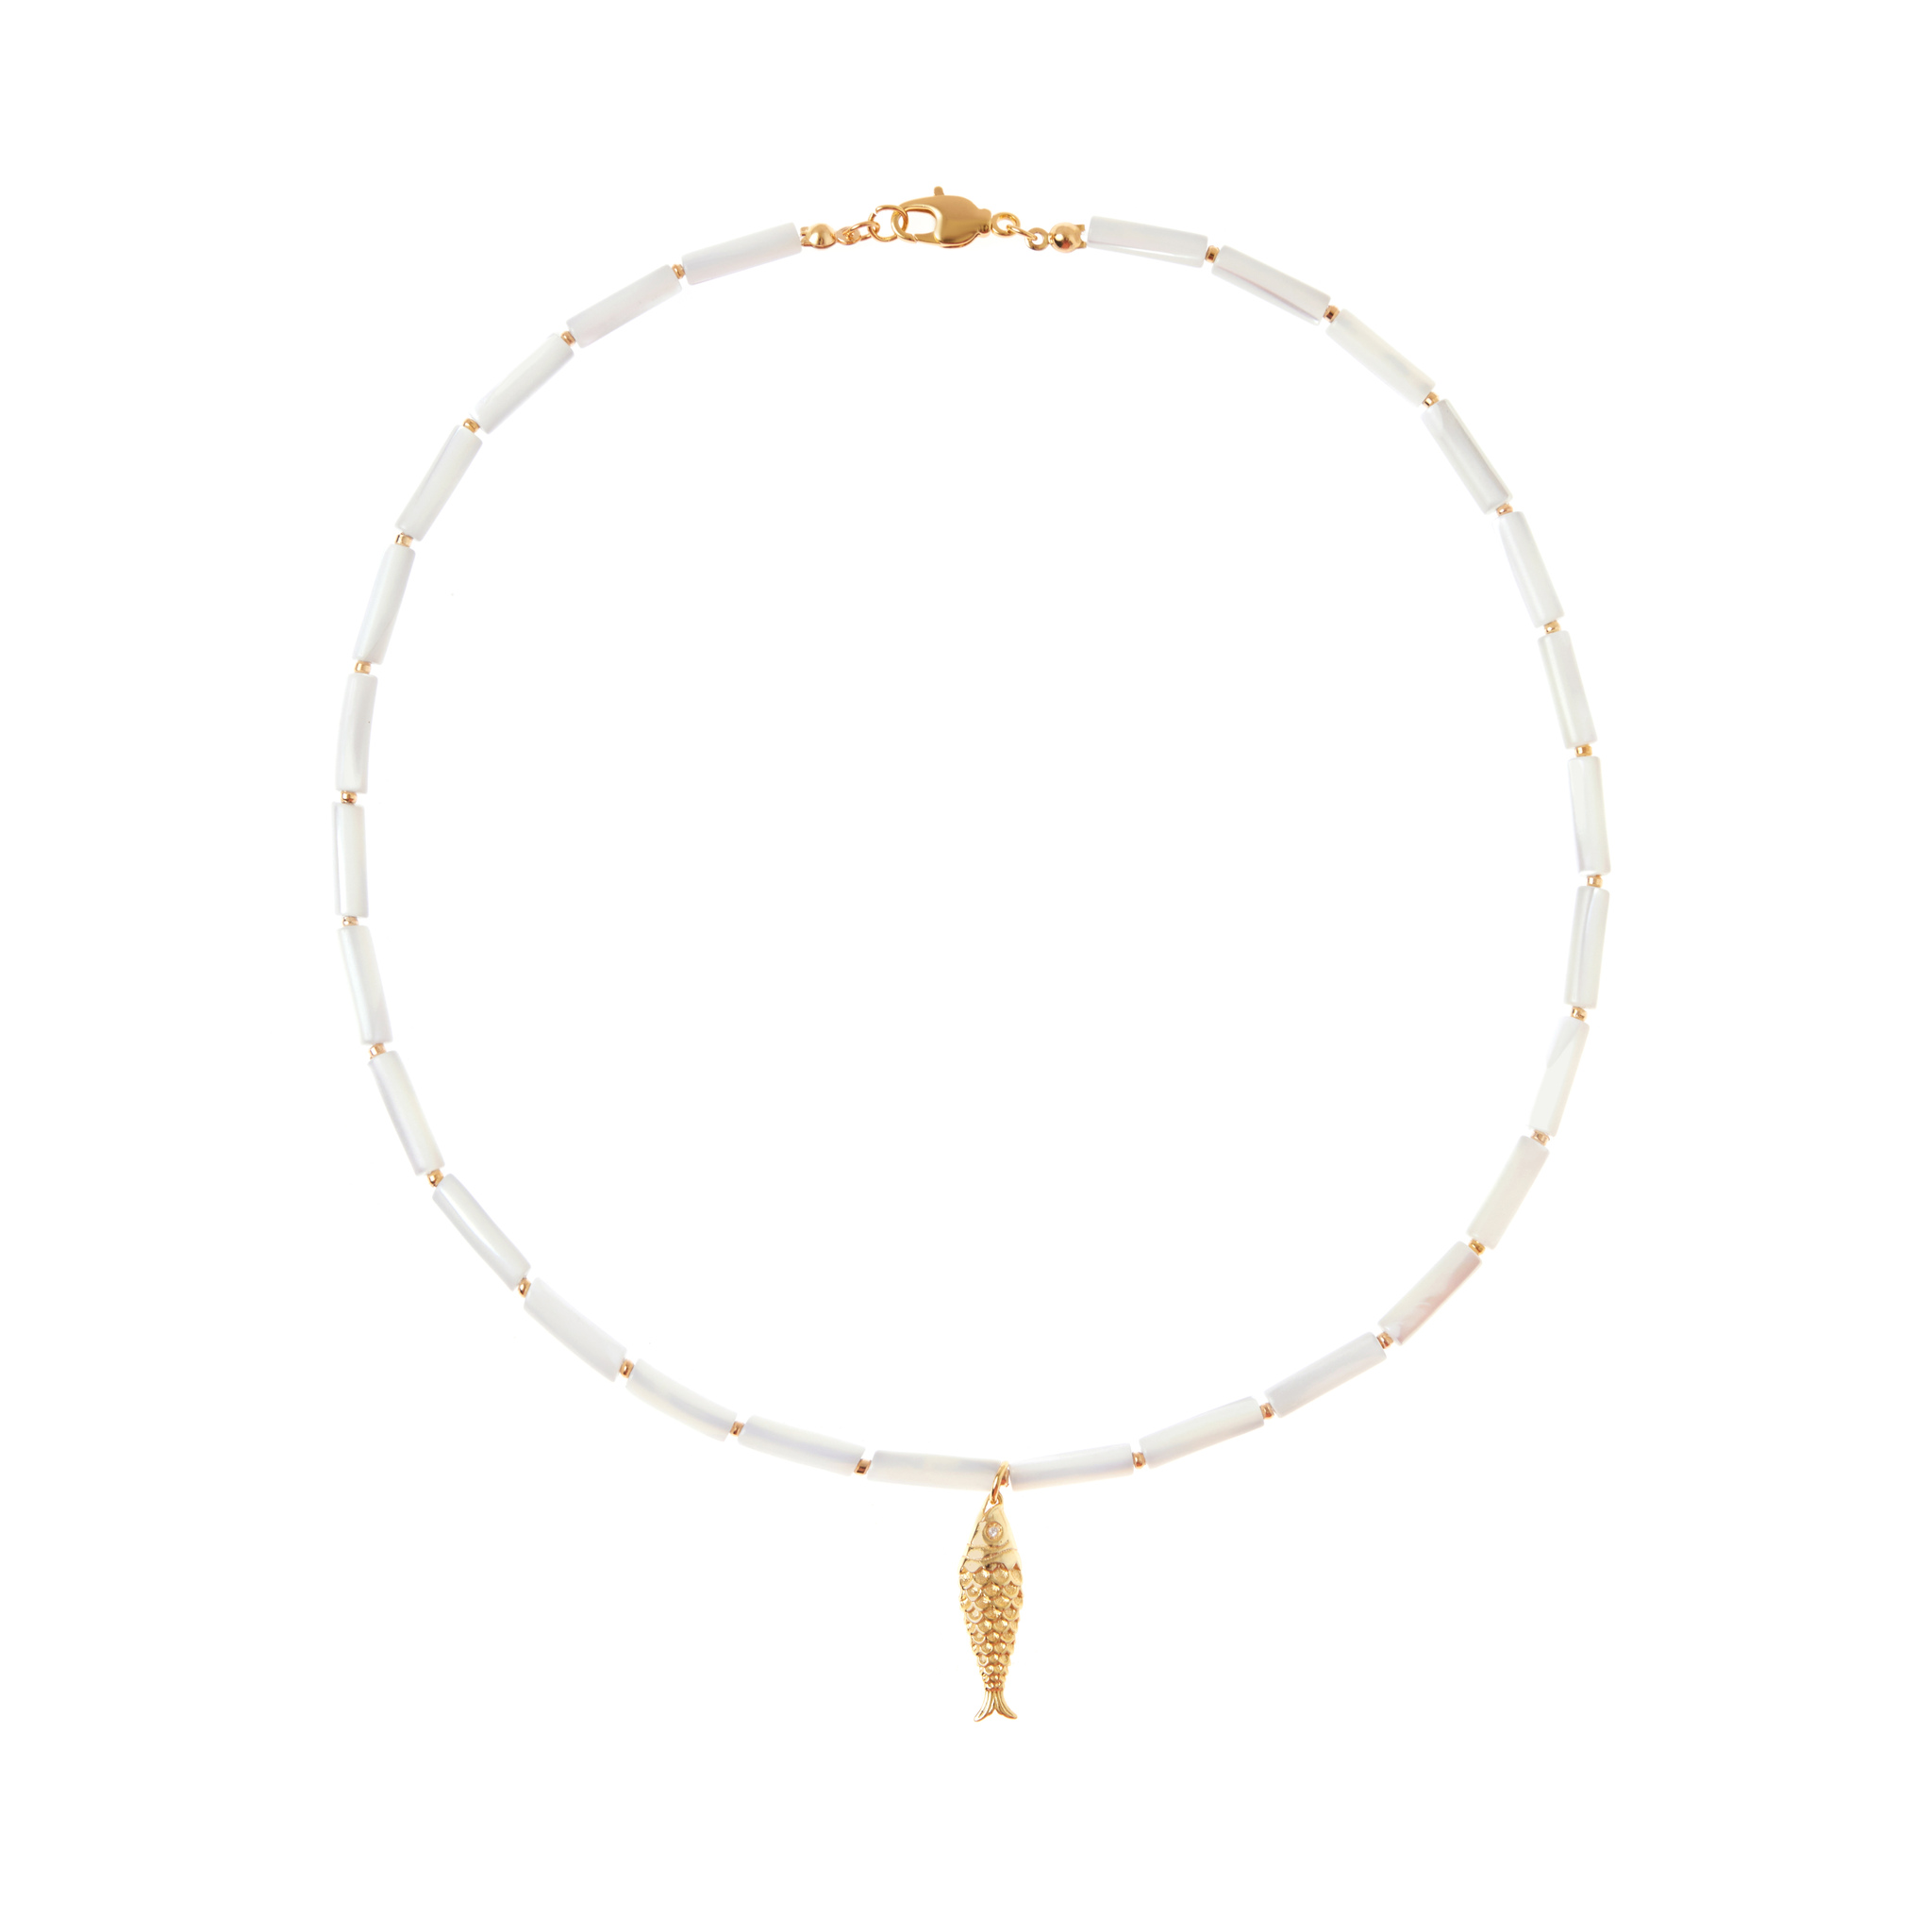 HOLLY JUNE Колье Gold Fish Tube Necklace - Pearl holly june колье major pearl twist necklace